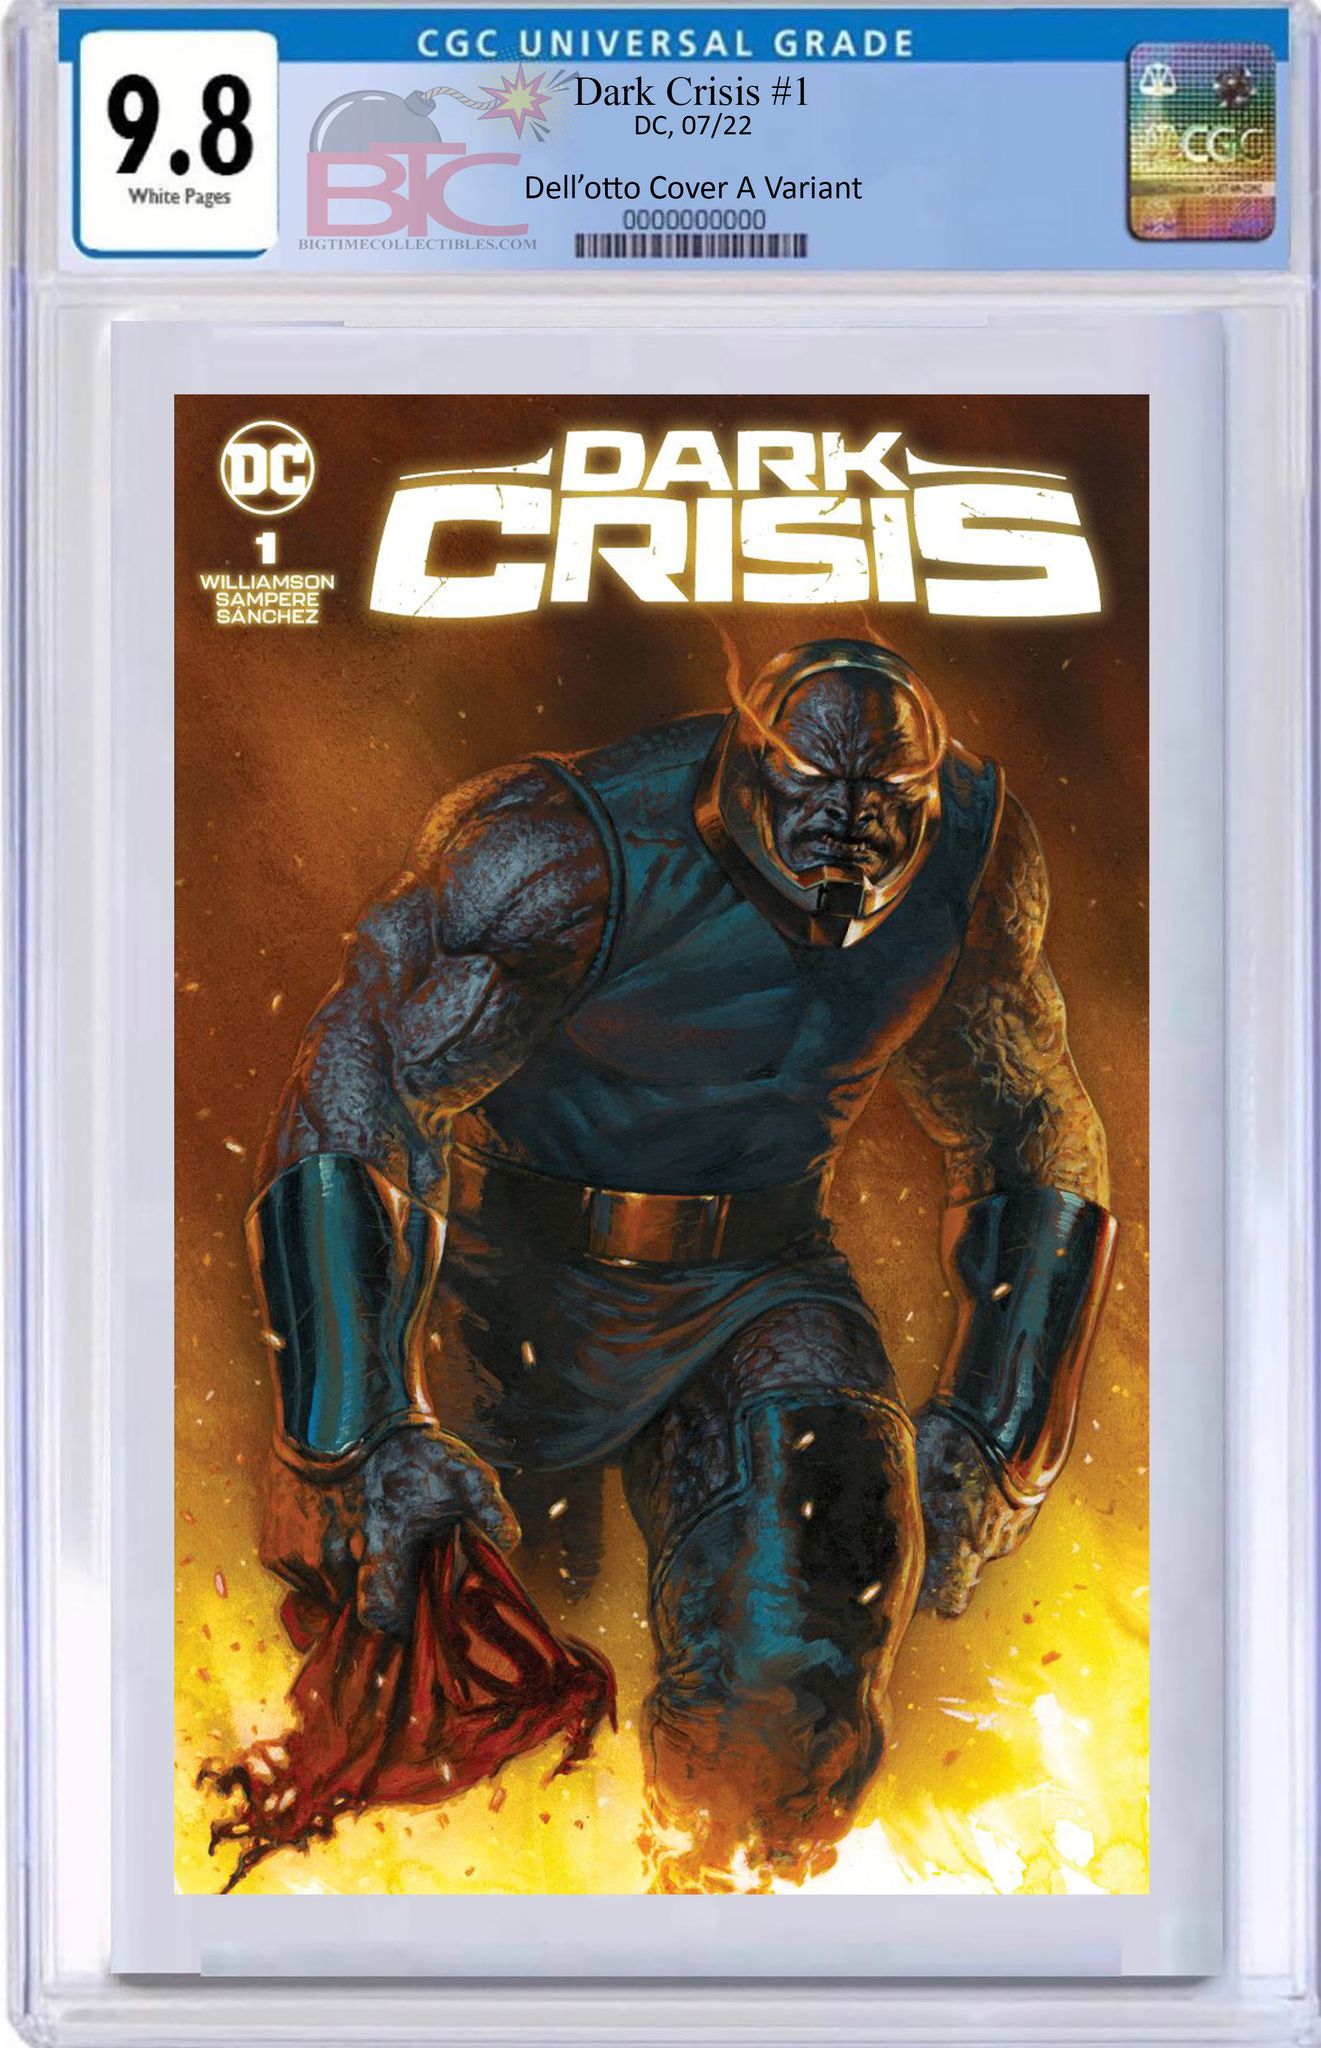 06/07/2022 DARK CRISIS #1 GABRIELE DELL'OTTO EXCLUSIVE VARIANT COVER RAW & GRADED OPTIONS